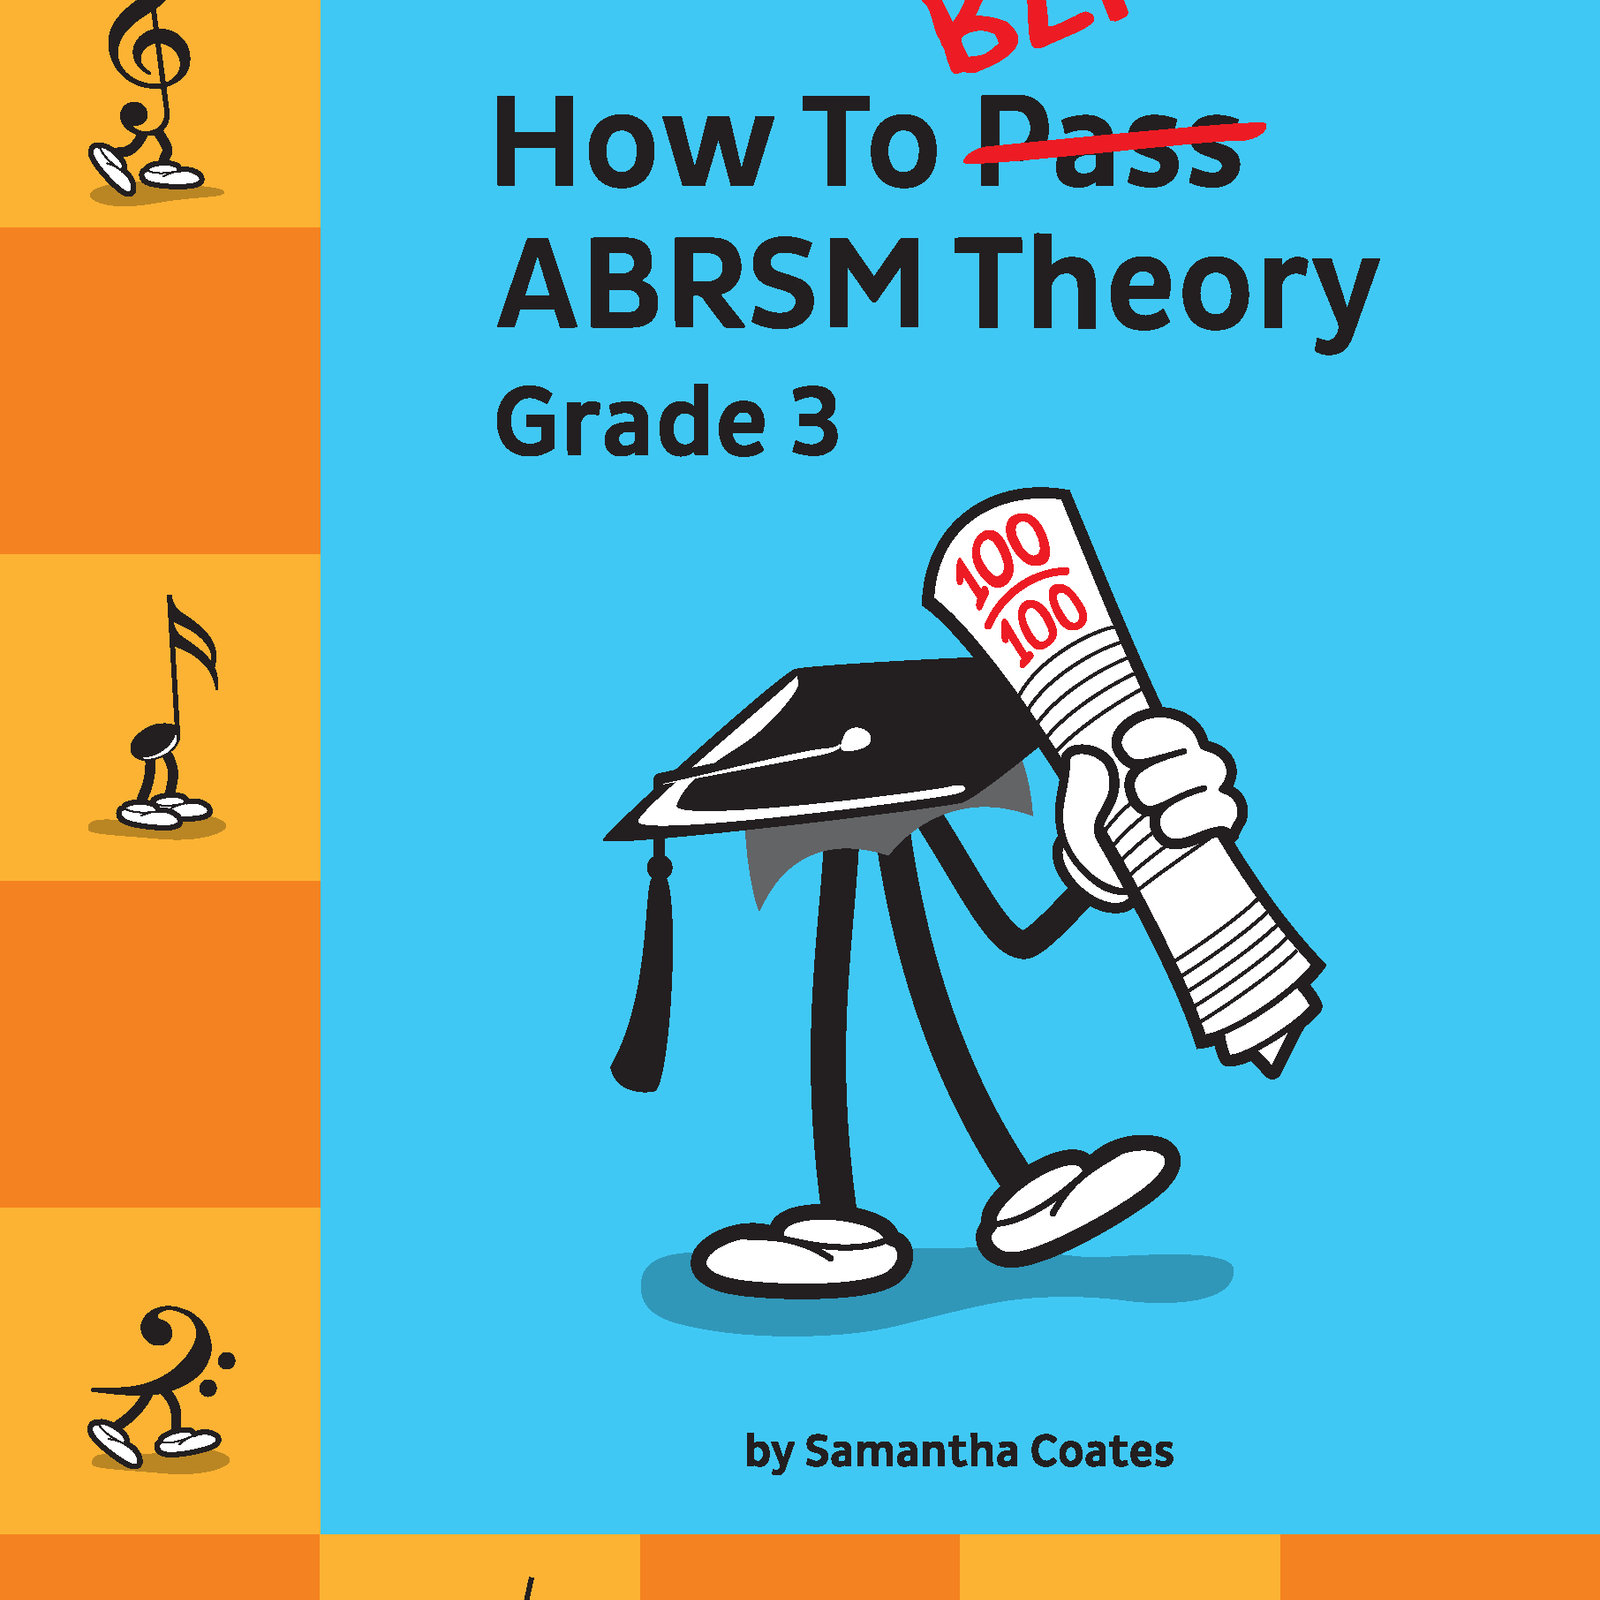 MS How to Blitz ABRSM Theory Gr 3